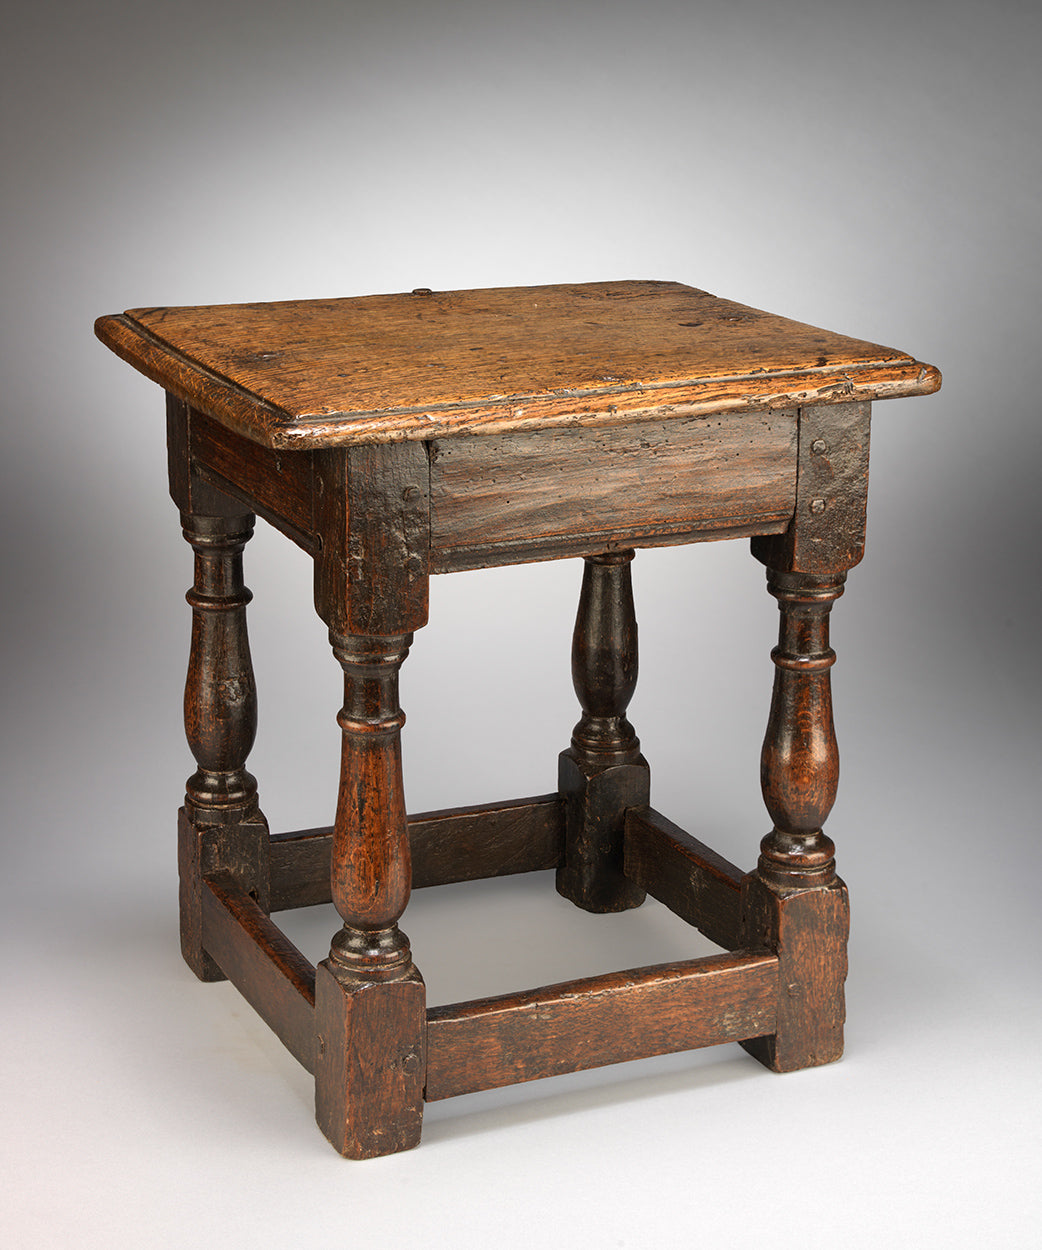 Delightful Diminutive William and Mary Joined Stool